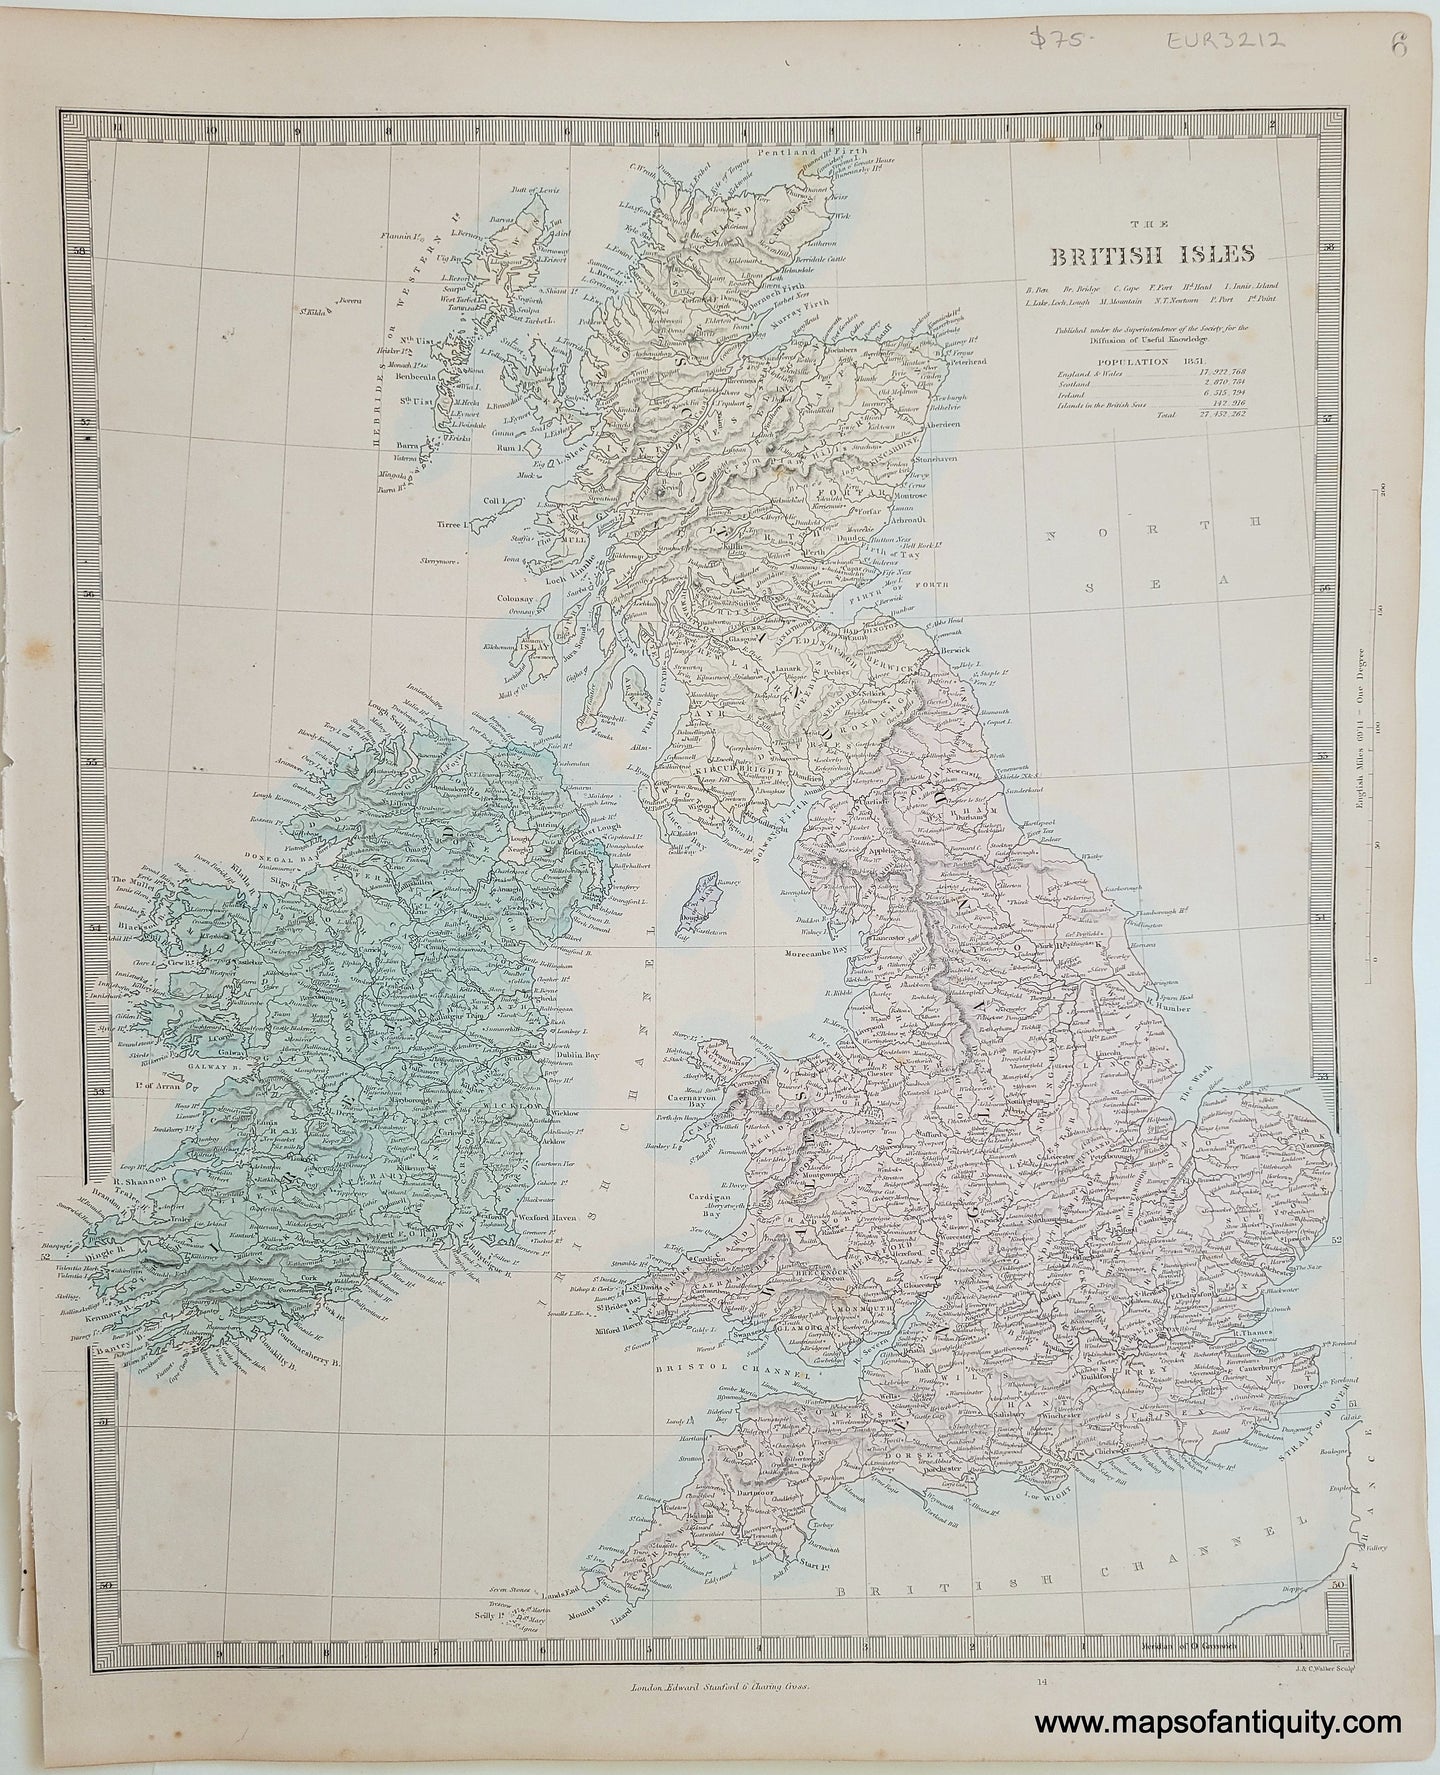 Genuine-Antique-Map-The-British-Isles-United-Kingdom-England-and-Wales-Scotland-Ireland--1860-SDUK-Society-for-the-Diffusion-of-Useful-Knowledge-Maps-Of-Antiquity-1800s-19th-century